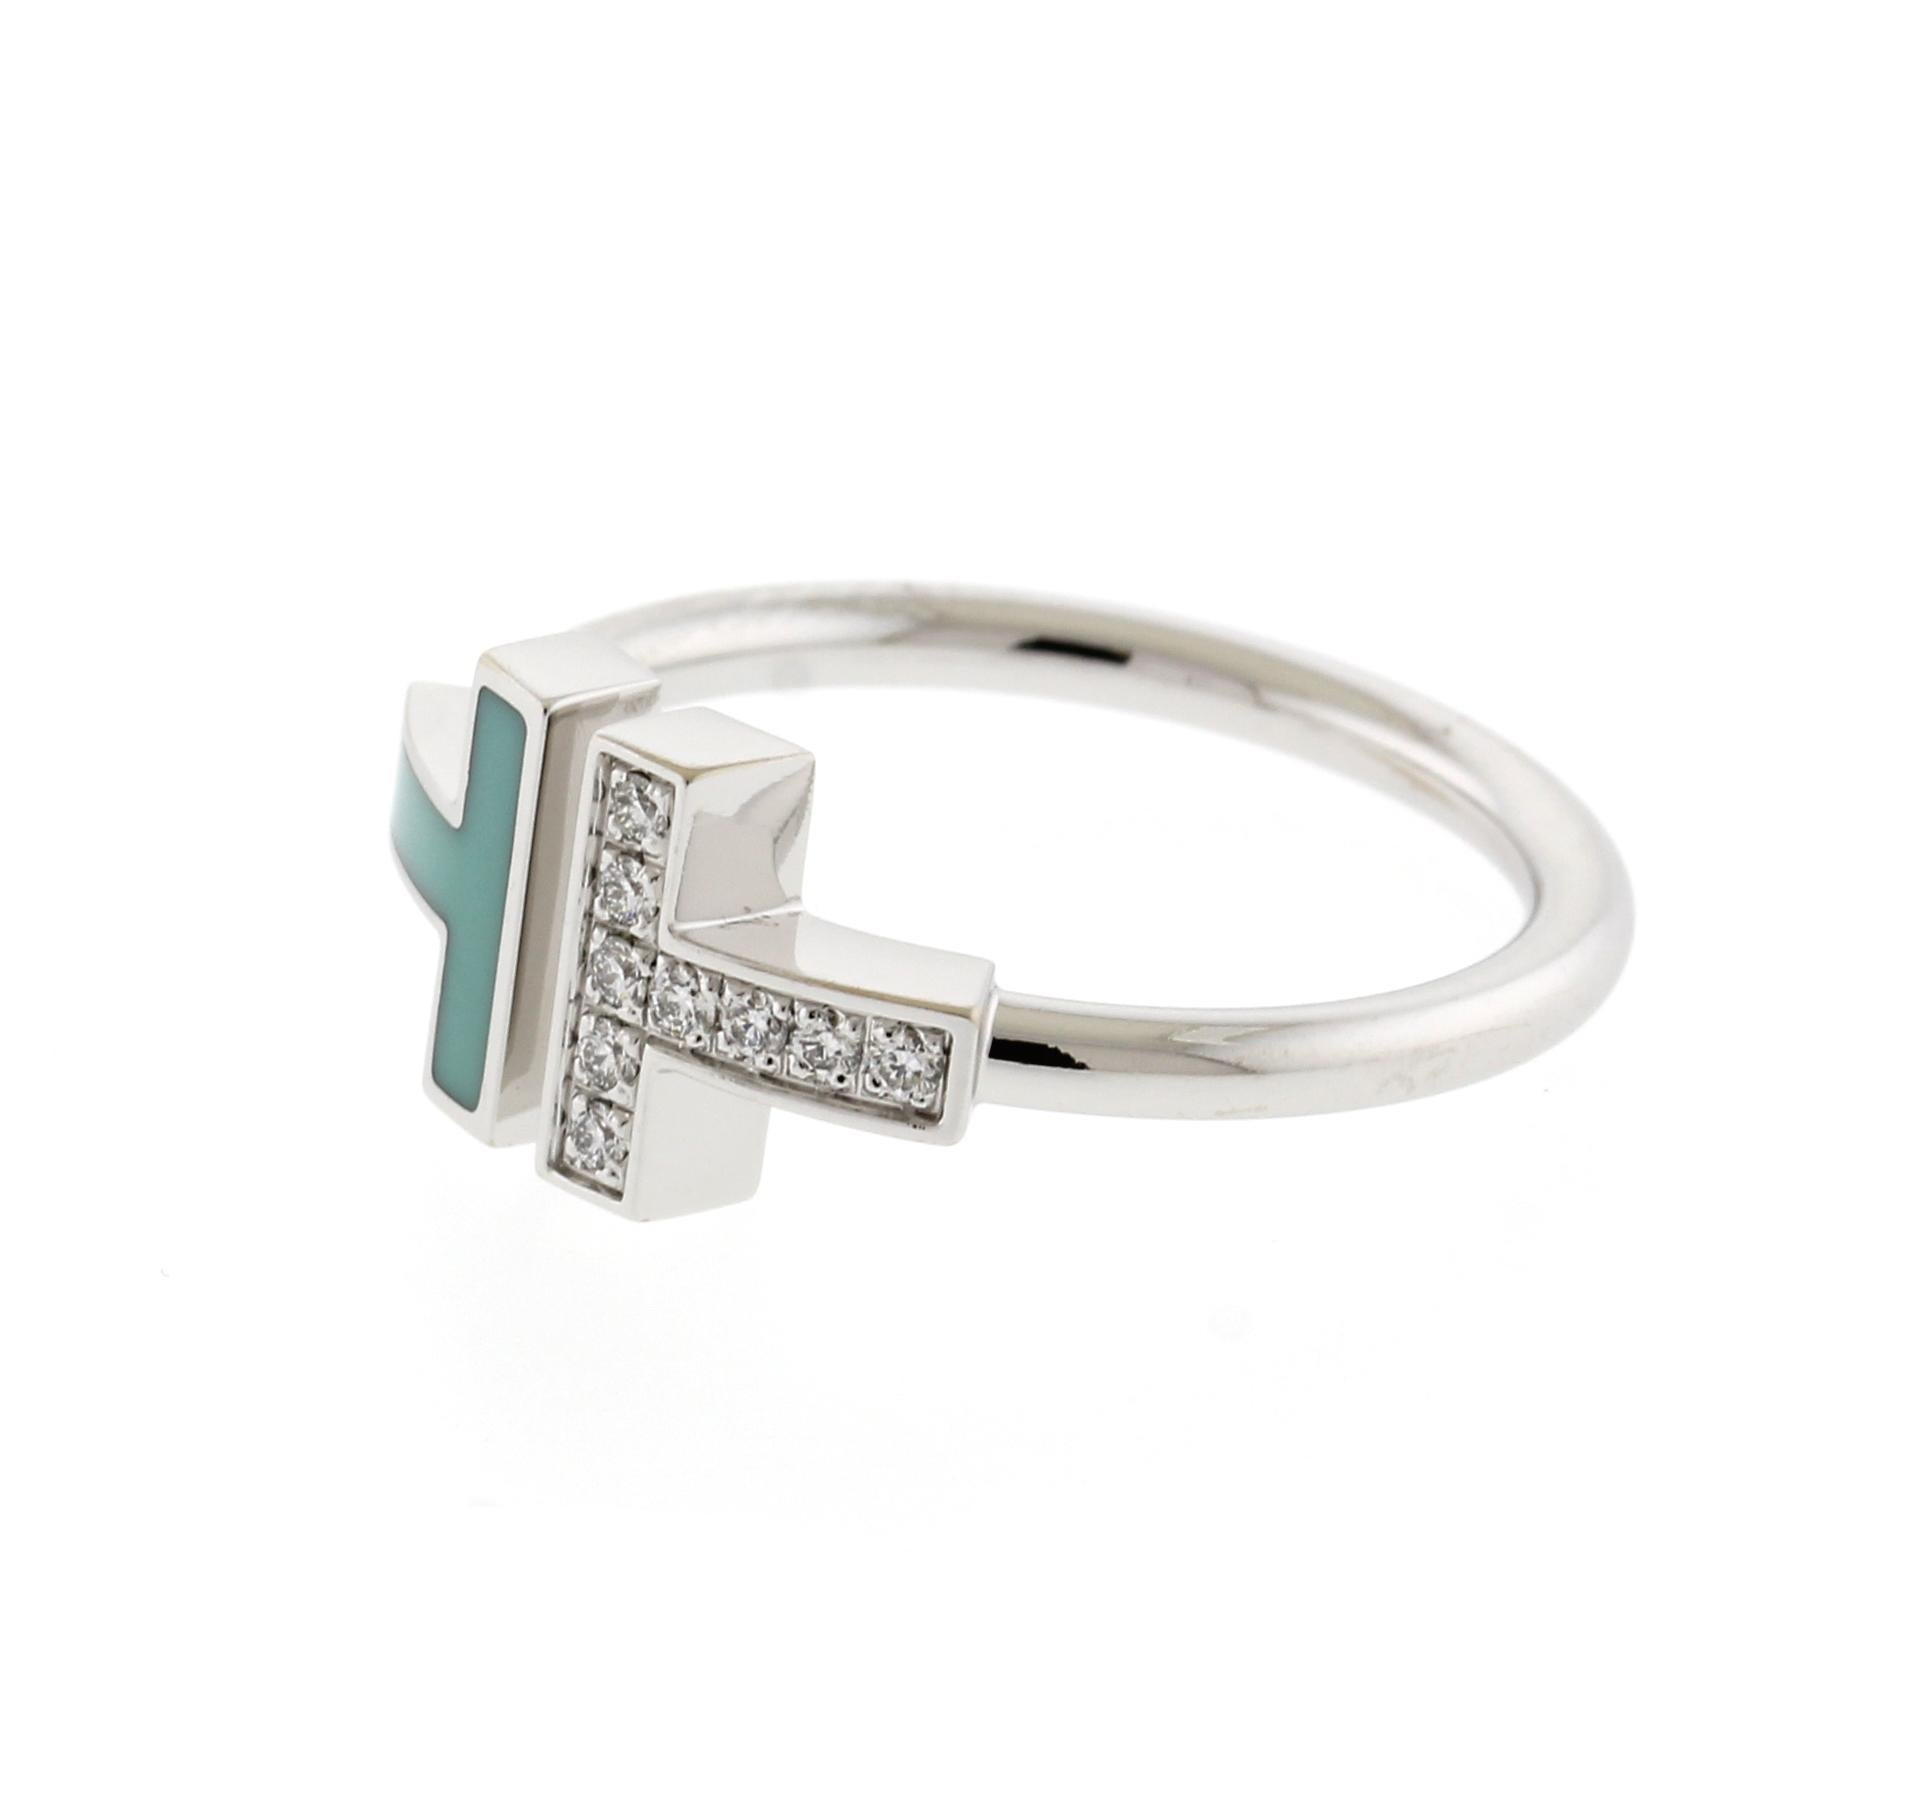 From Tiffany & Co, Diamond and Turquoise Wire Ring from the Tiffany T collection.
• Designer: Tiffany & Co.
• Metal: 18 karat white gold
• Circa: 2020s
• Diamond: 9 Diamonds =.07 
• Packaging:  Tiffany Ring Box
• Condition: Excellent

